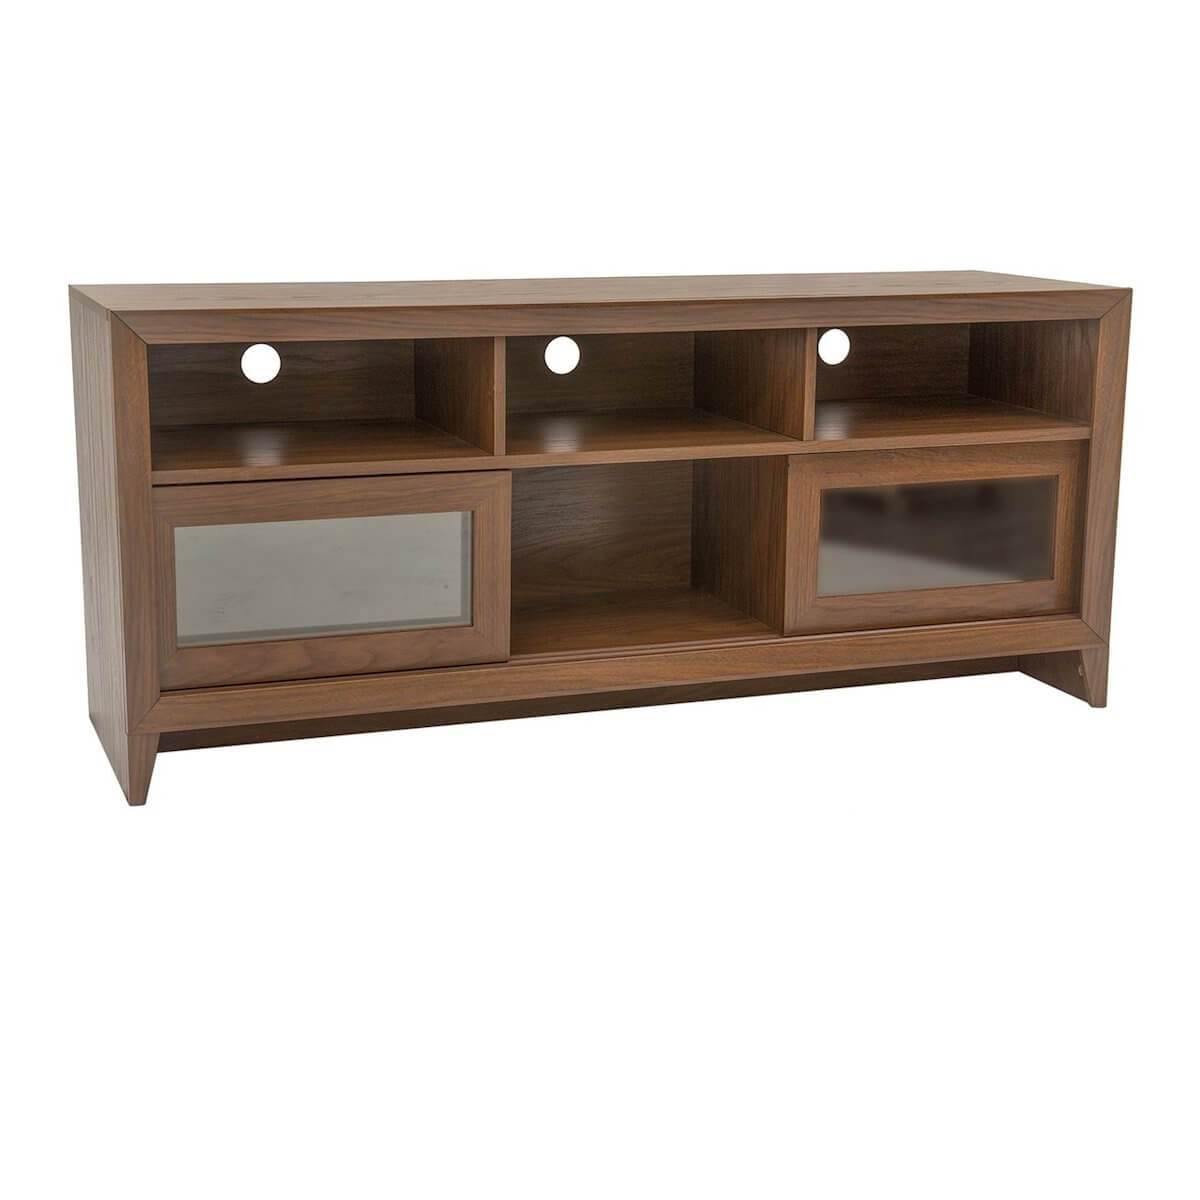 Techni Mobili Hickory Modern TV Stand with Storage for TVs Up To 60" RTA-8811-HRY